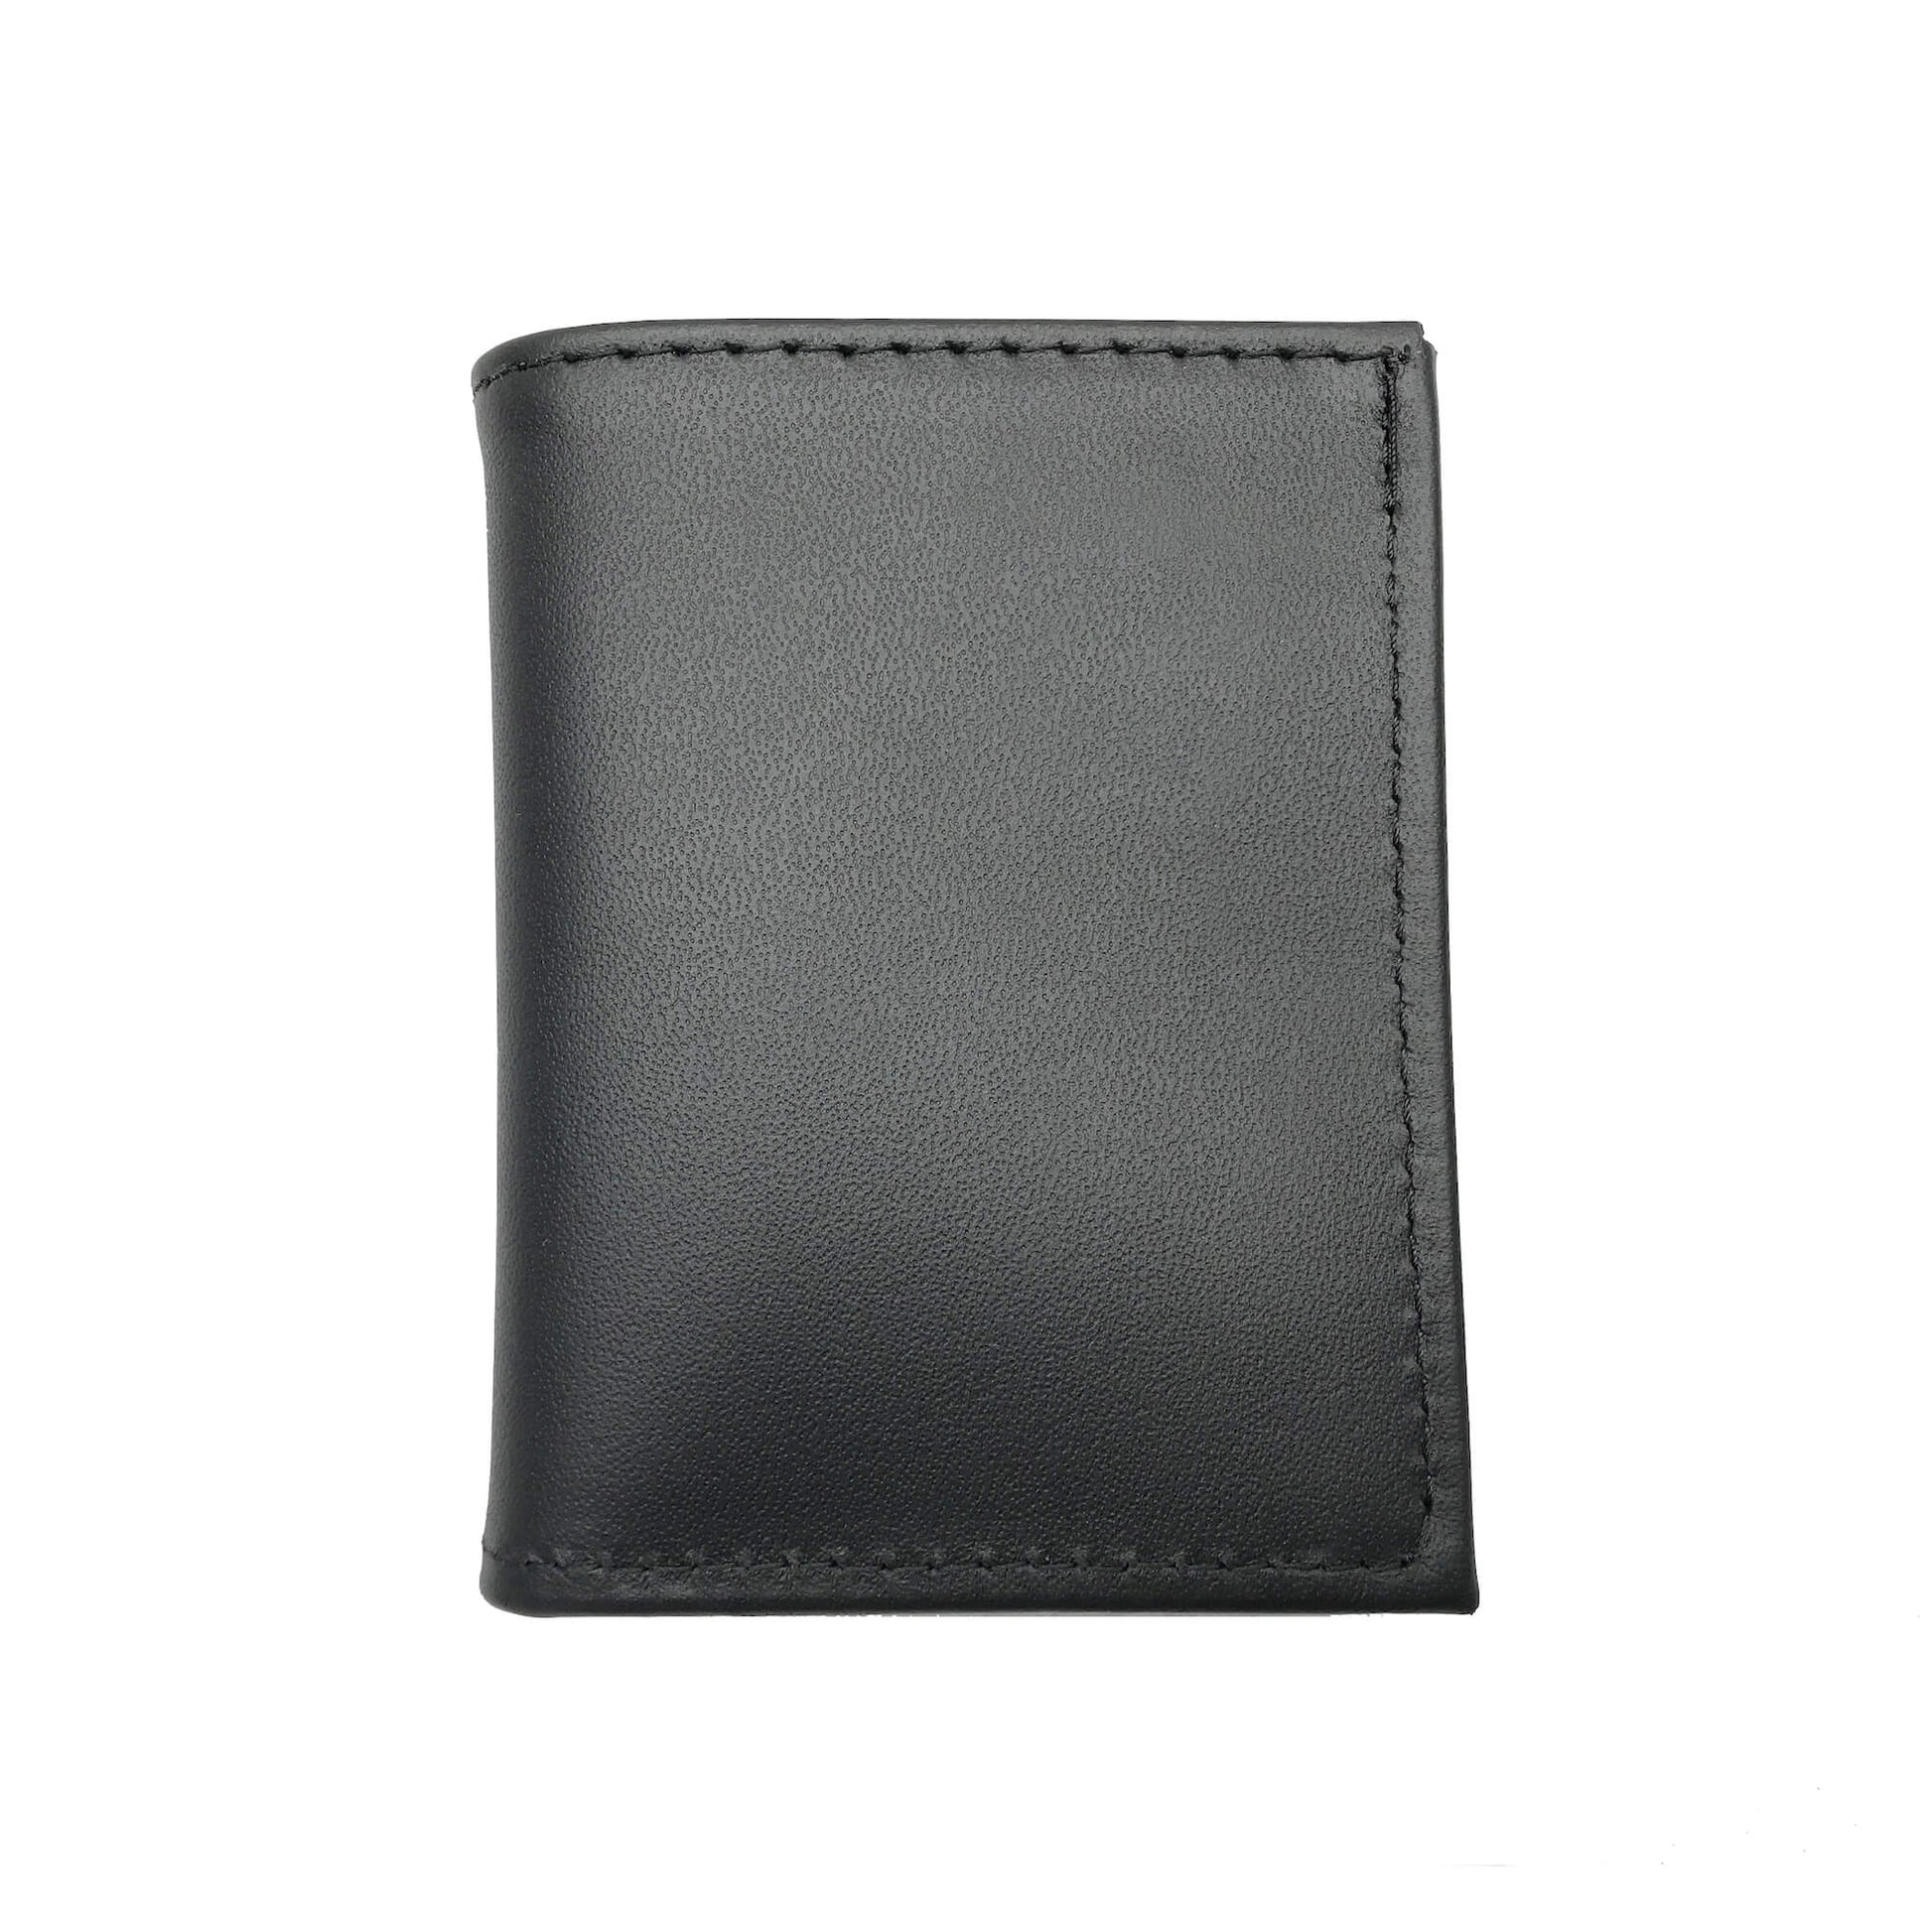 Connecticut Department of Correction (DOC) Bifold Hidden Badge Wallet-Perfect Fit-911 Duty Gear USA